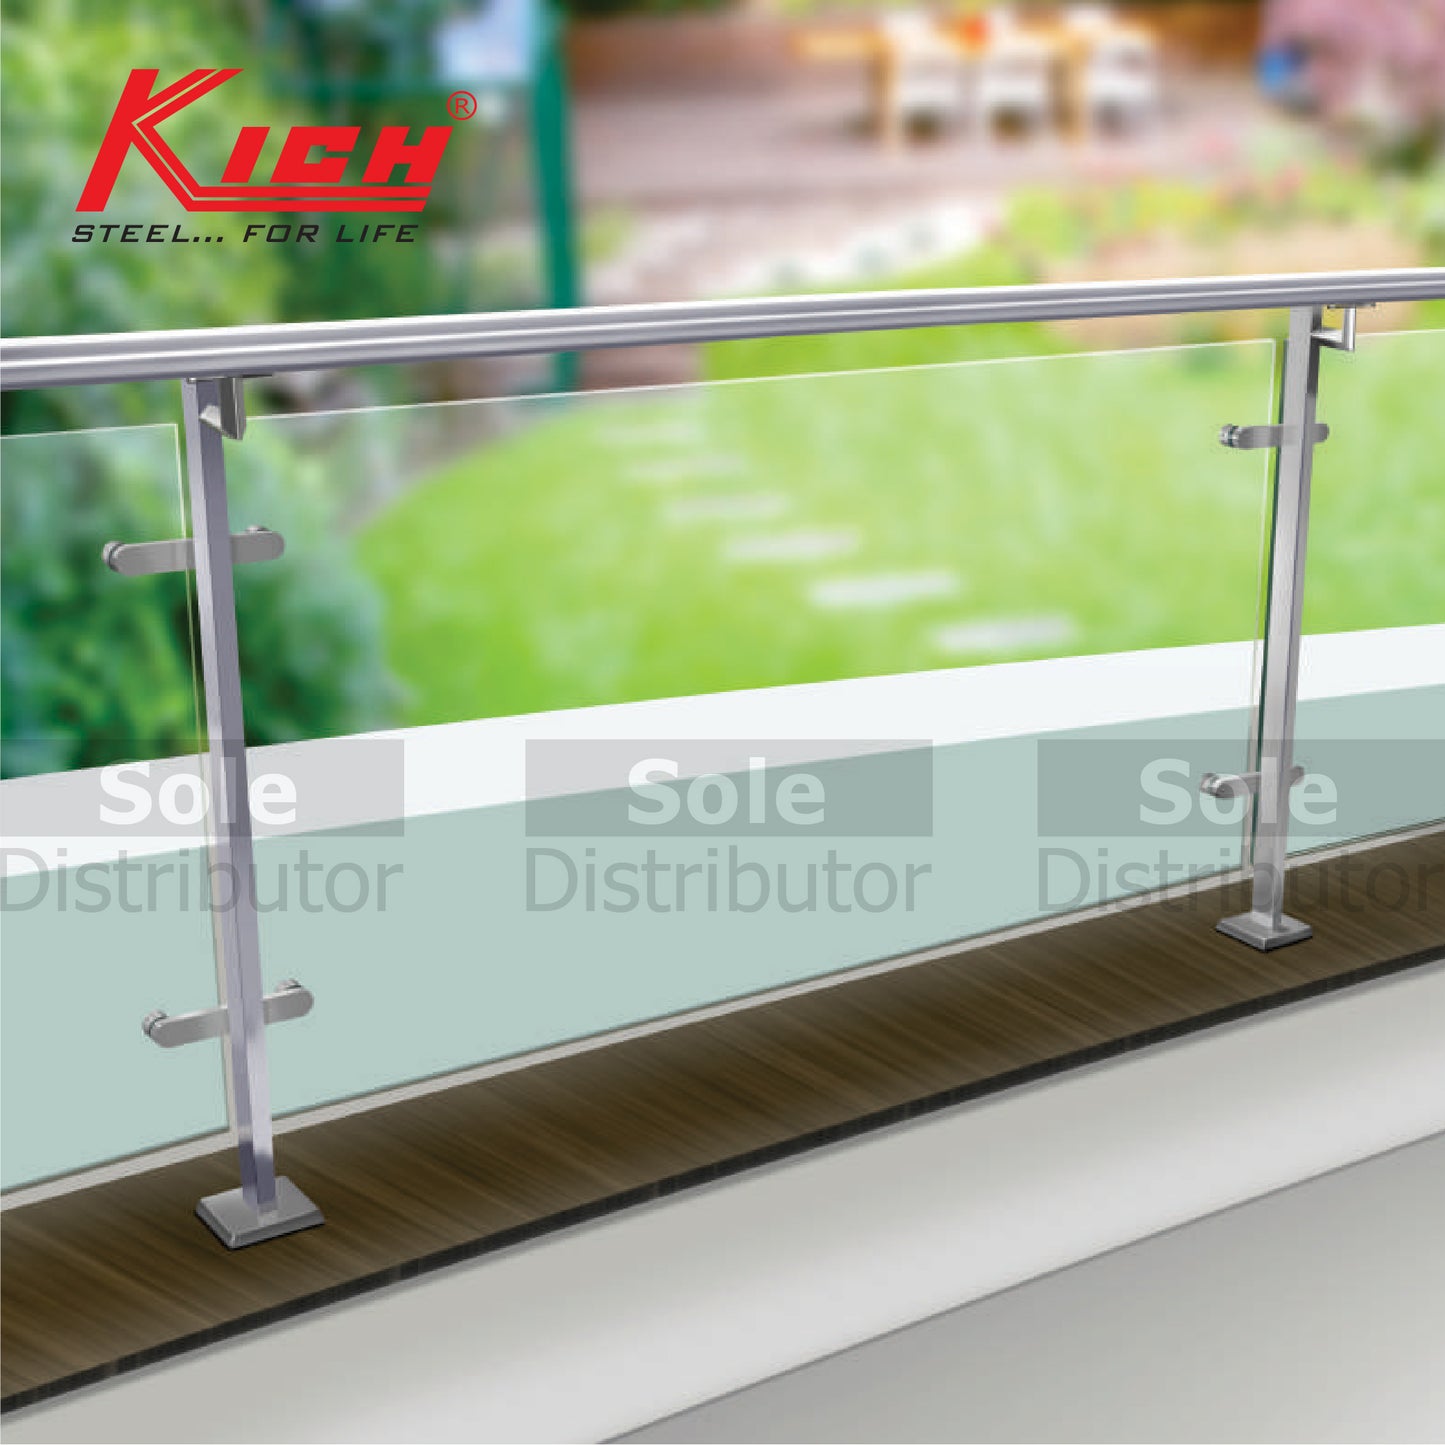 Kich Hand Rail Top Mounted Rectangle Baluster System With Glass Stainless Steel 316 Grade - DT21-2-DGLS